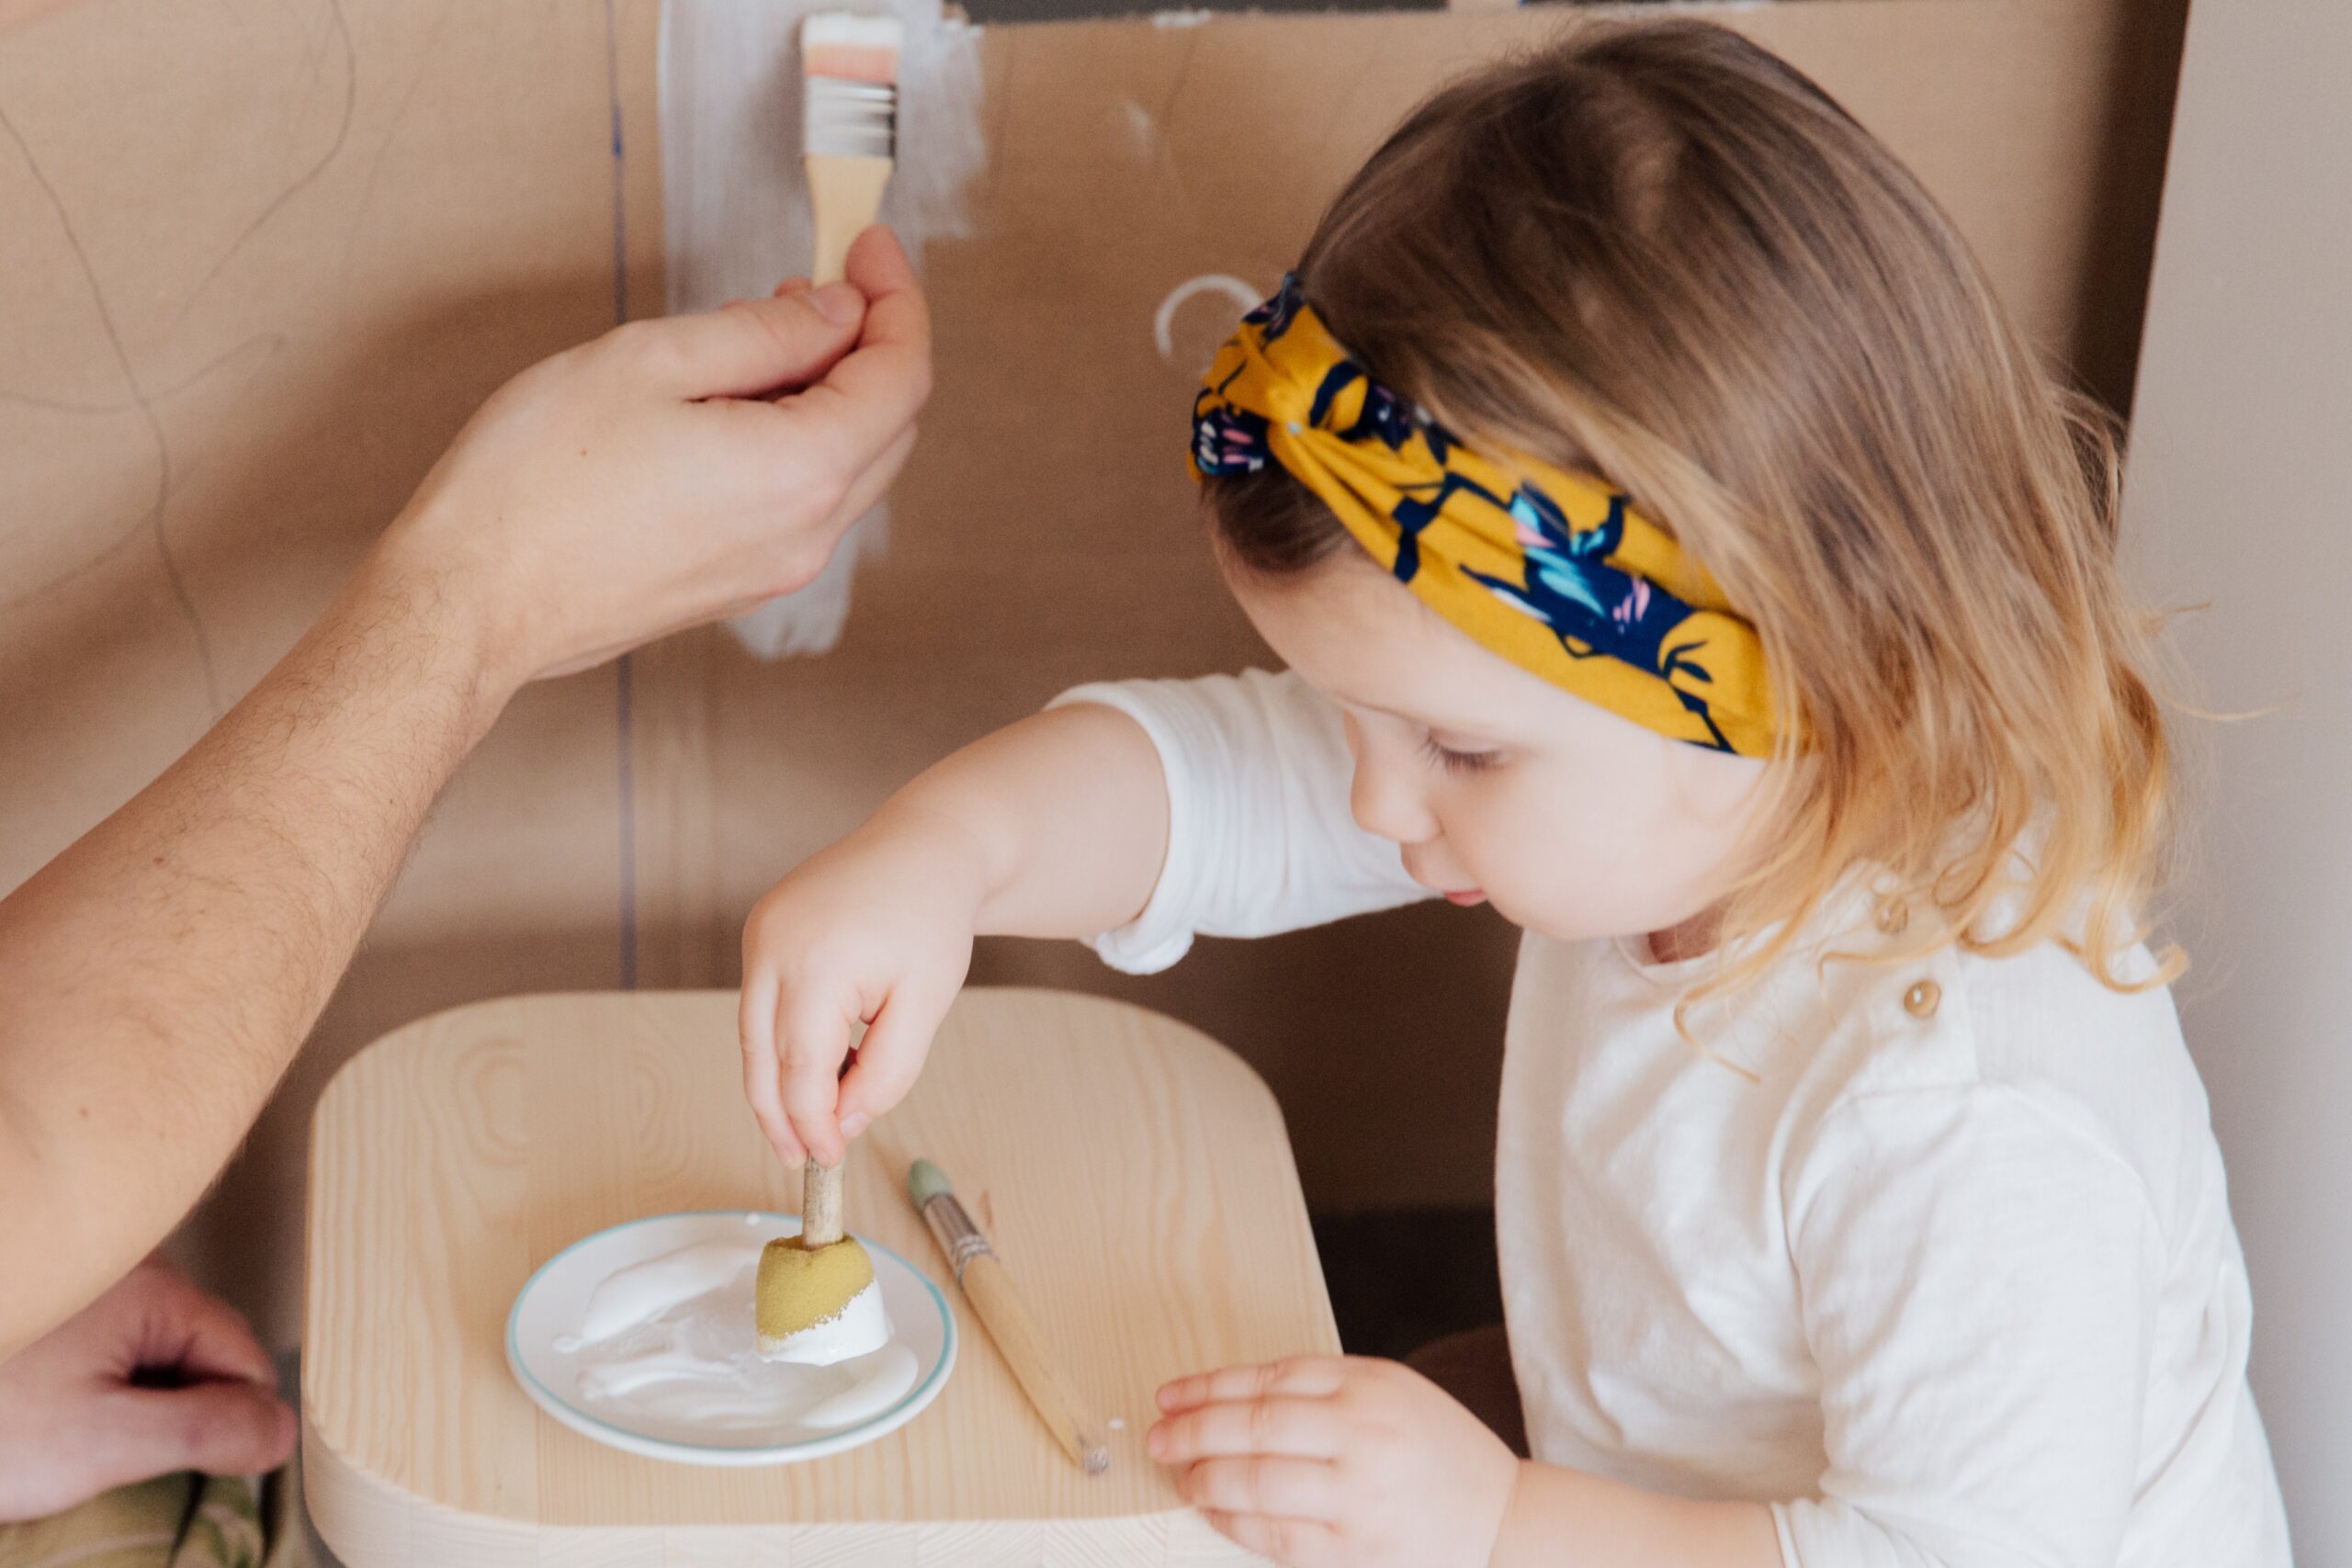 A toddler is having fun painting with a sponge.